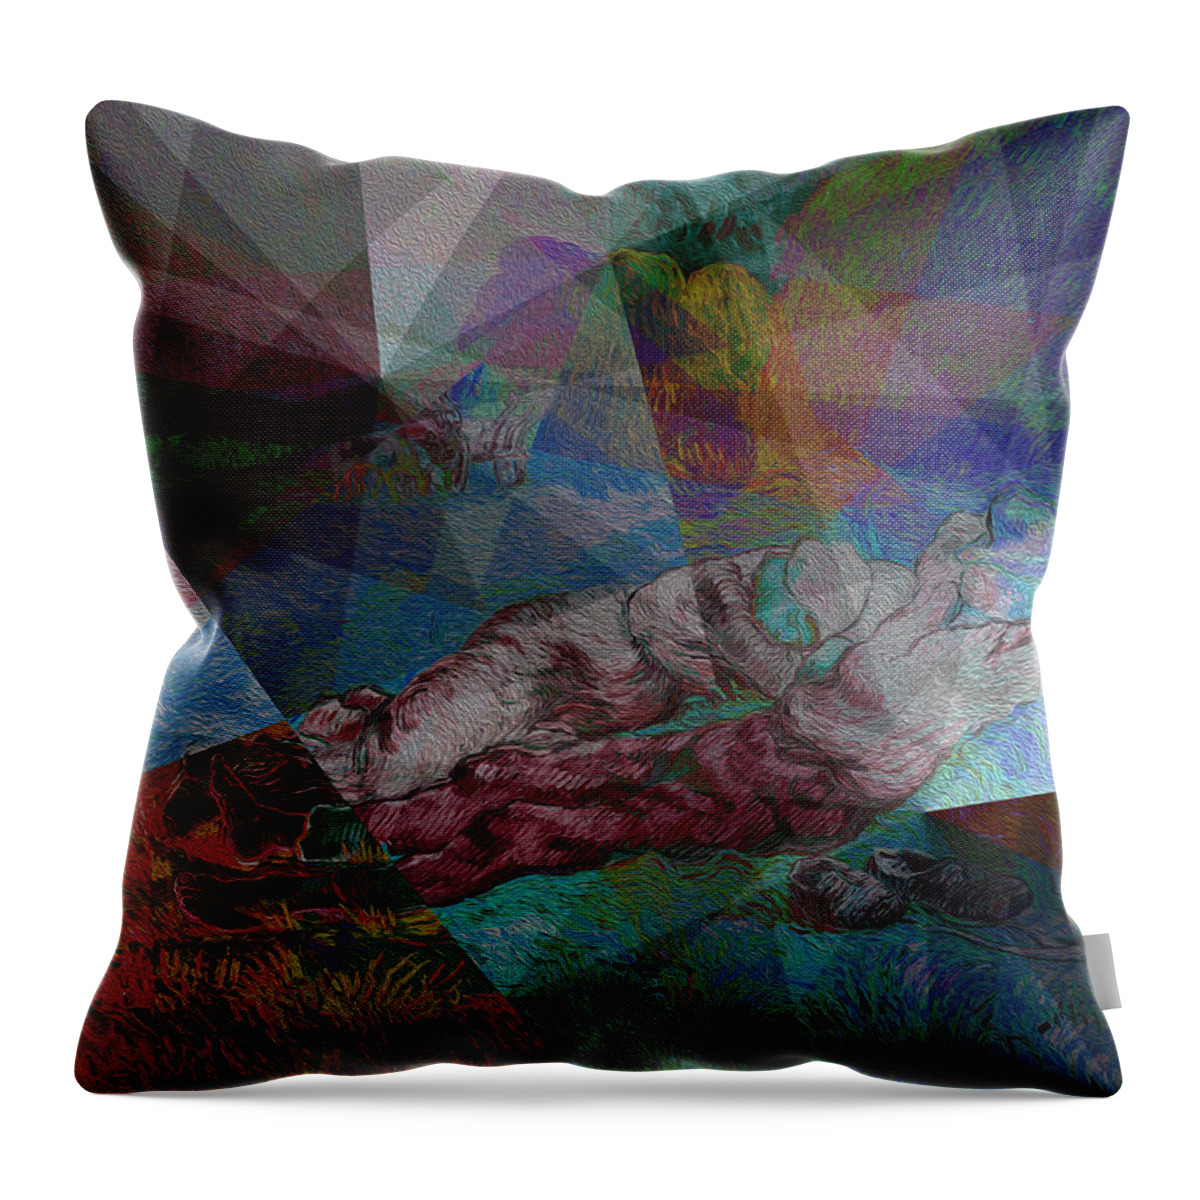 Abstract In The Living Room Throw Pillow featuring the painting Stained Glass I by David Bridburg